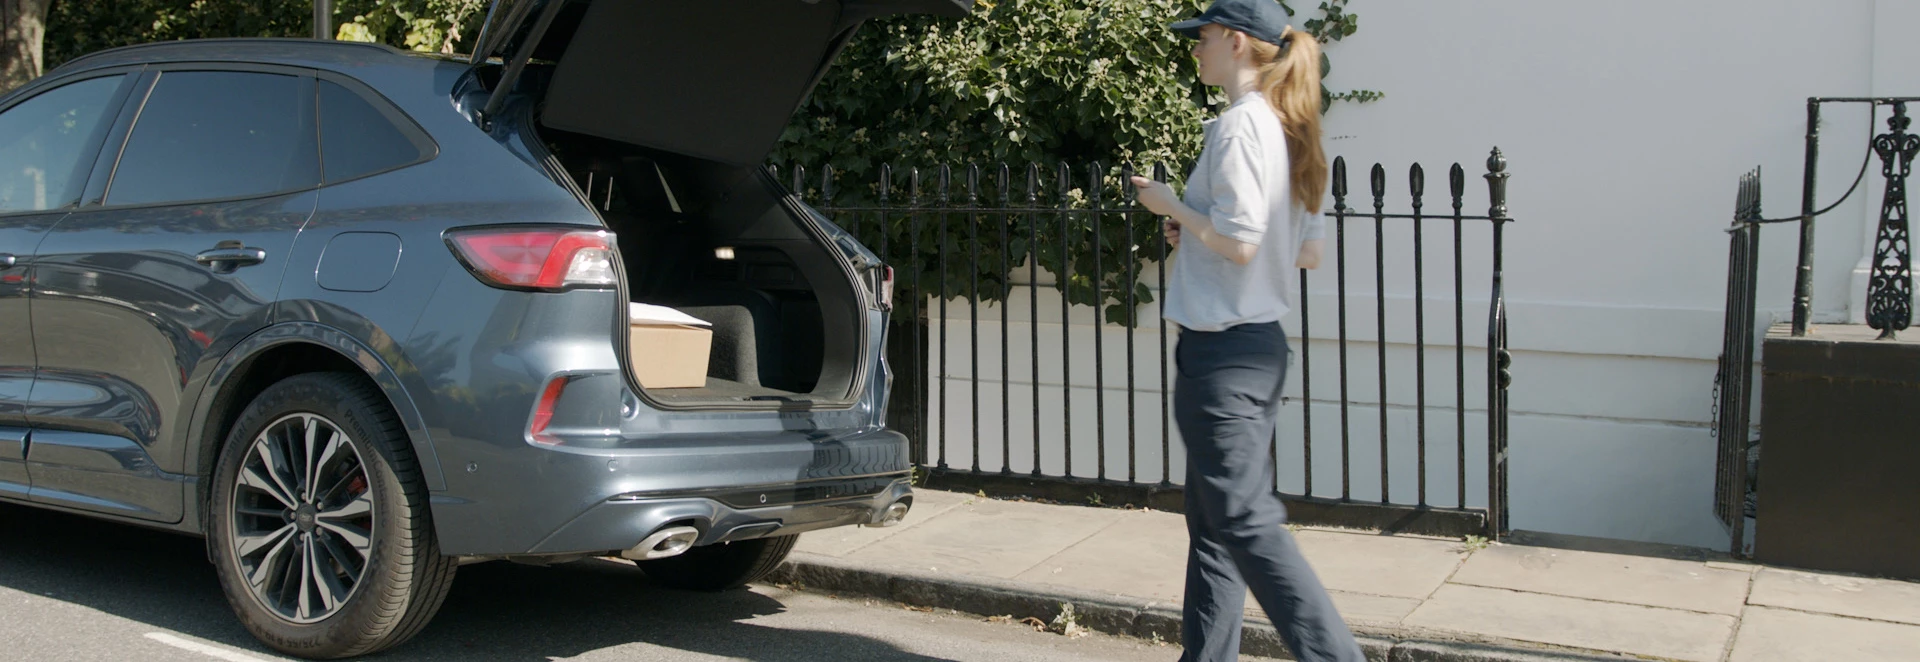 You can now have parcels dropped off to your Ford’s boot 